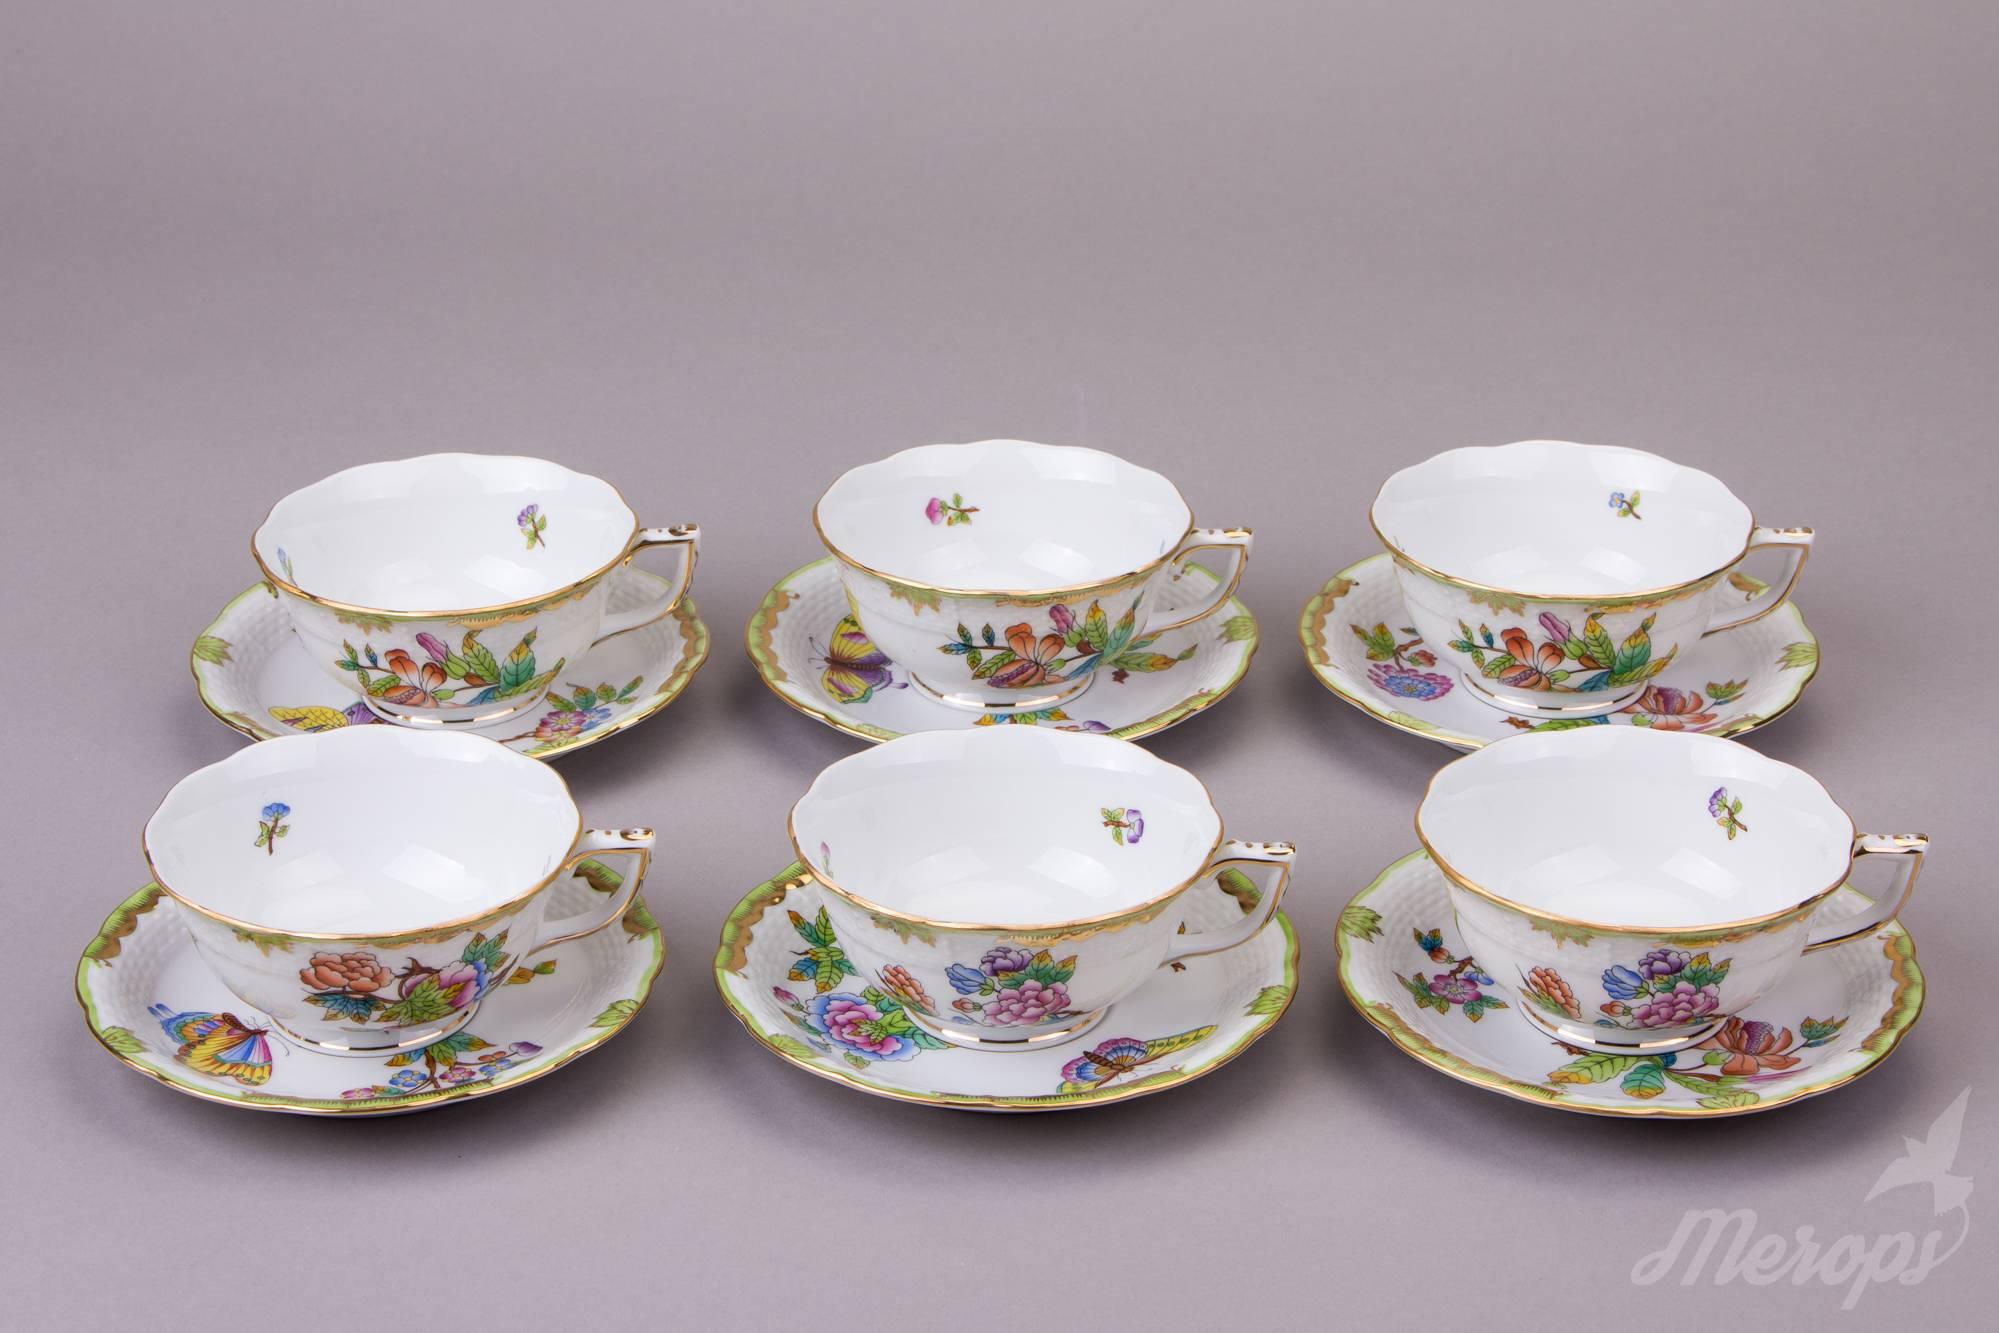 We ship this item worldwide for 70 USD with insurance. Shipping usually takes 3-7 business days.  

Manufacturer:	Herend Porcelain Manufactory (Hungary)
Quality:	Handpainted, 1st class
Pattern:	Queen Victoria (VBO)
Condition:	Pre-owned, in